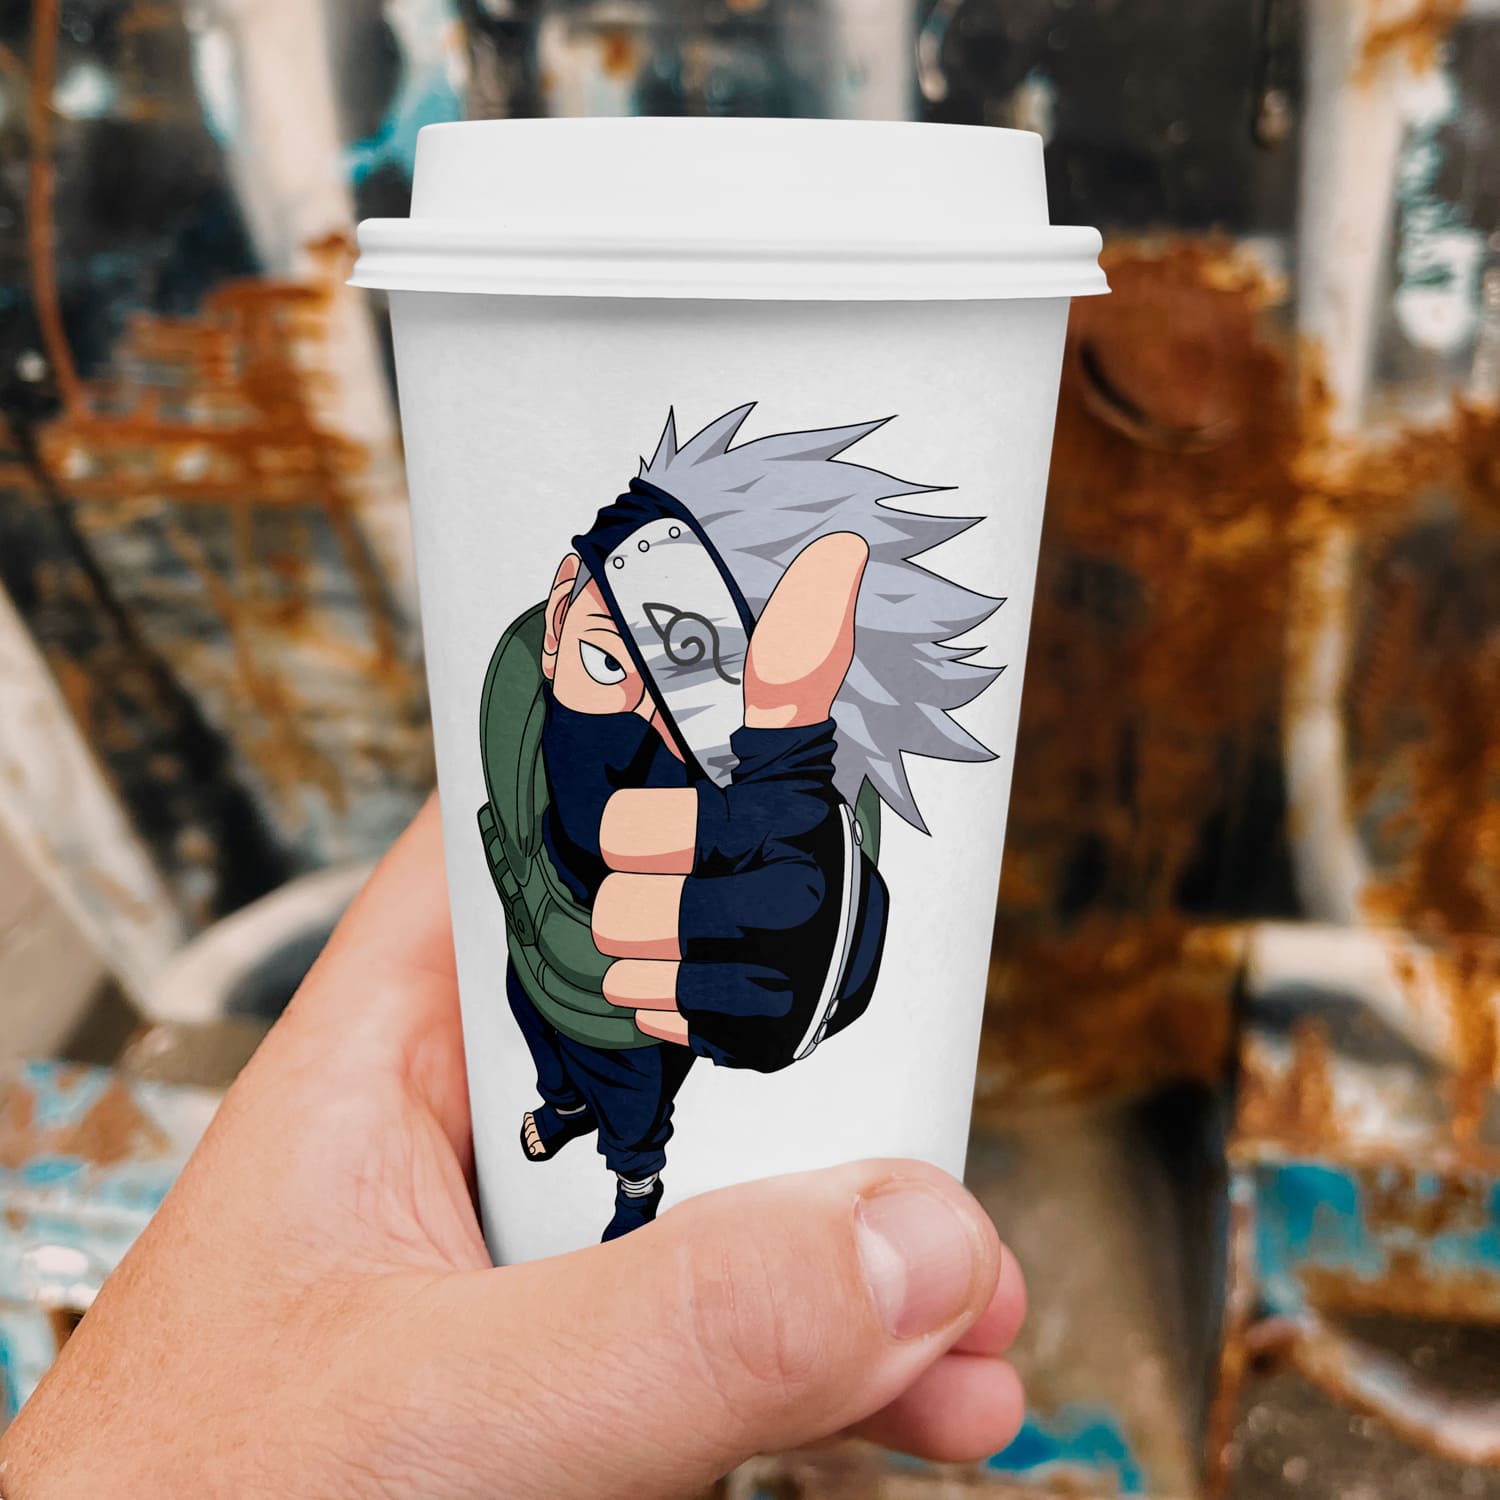 Kakashi SVG pack on the cup of coffee.